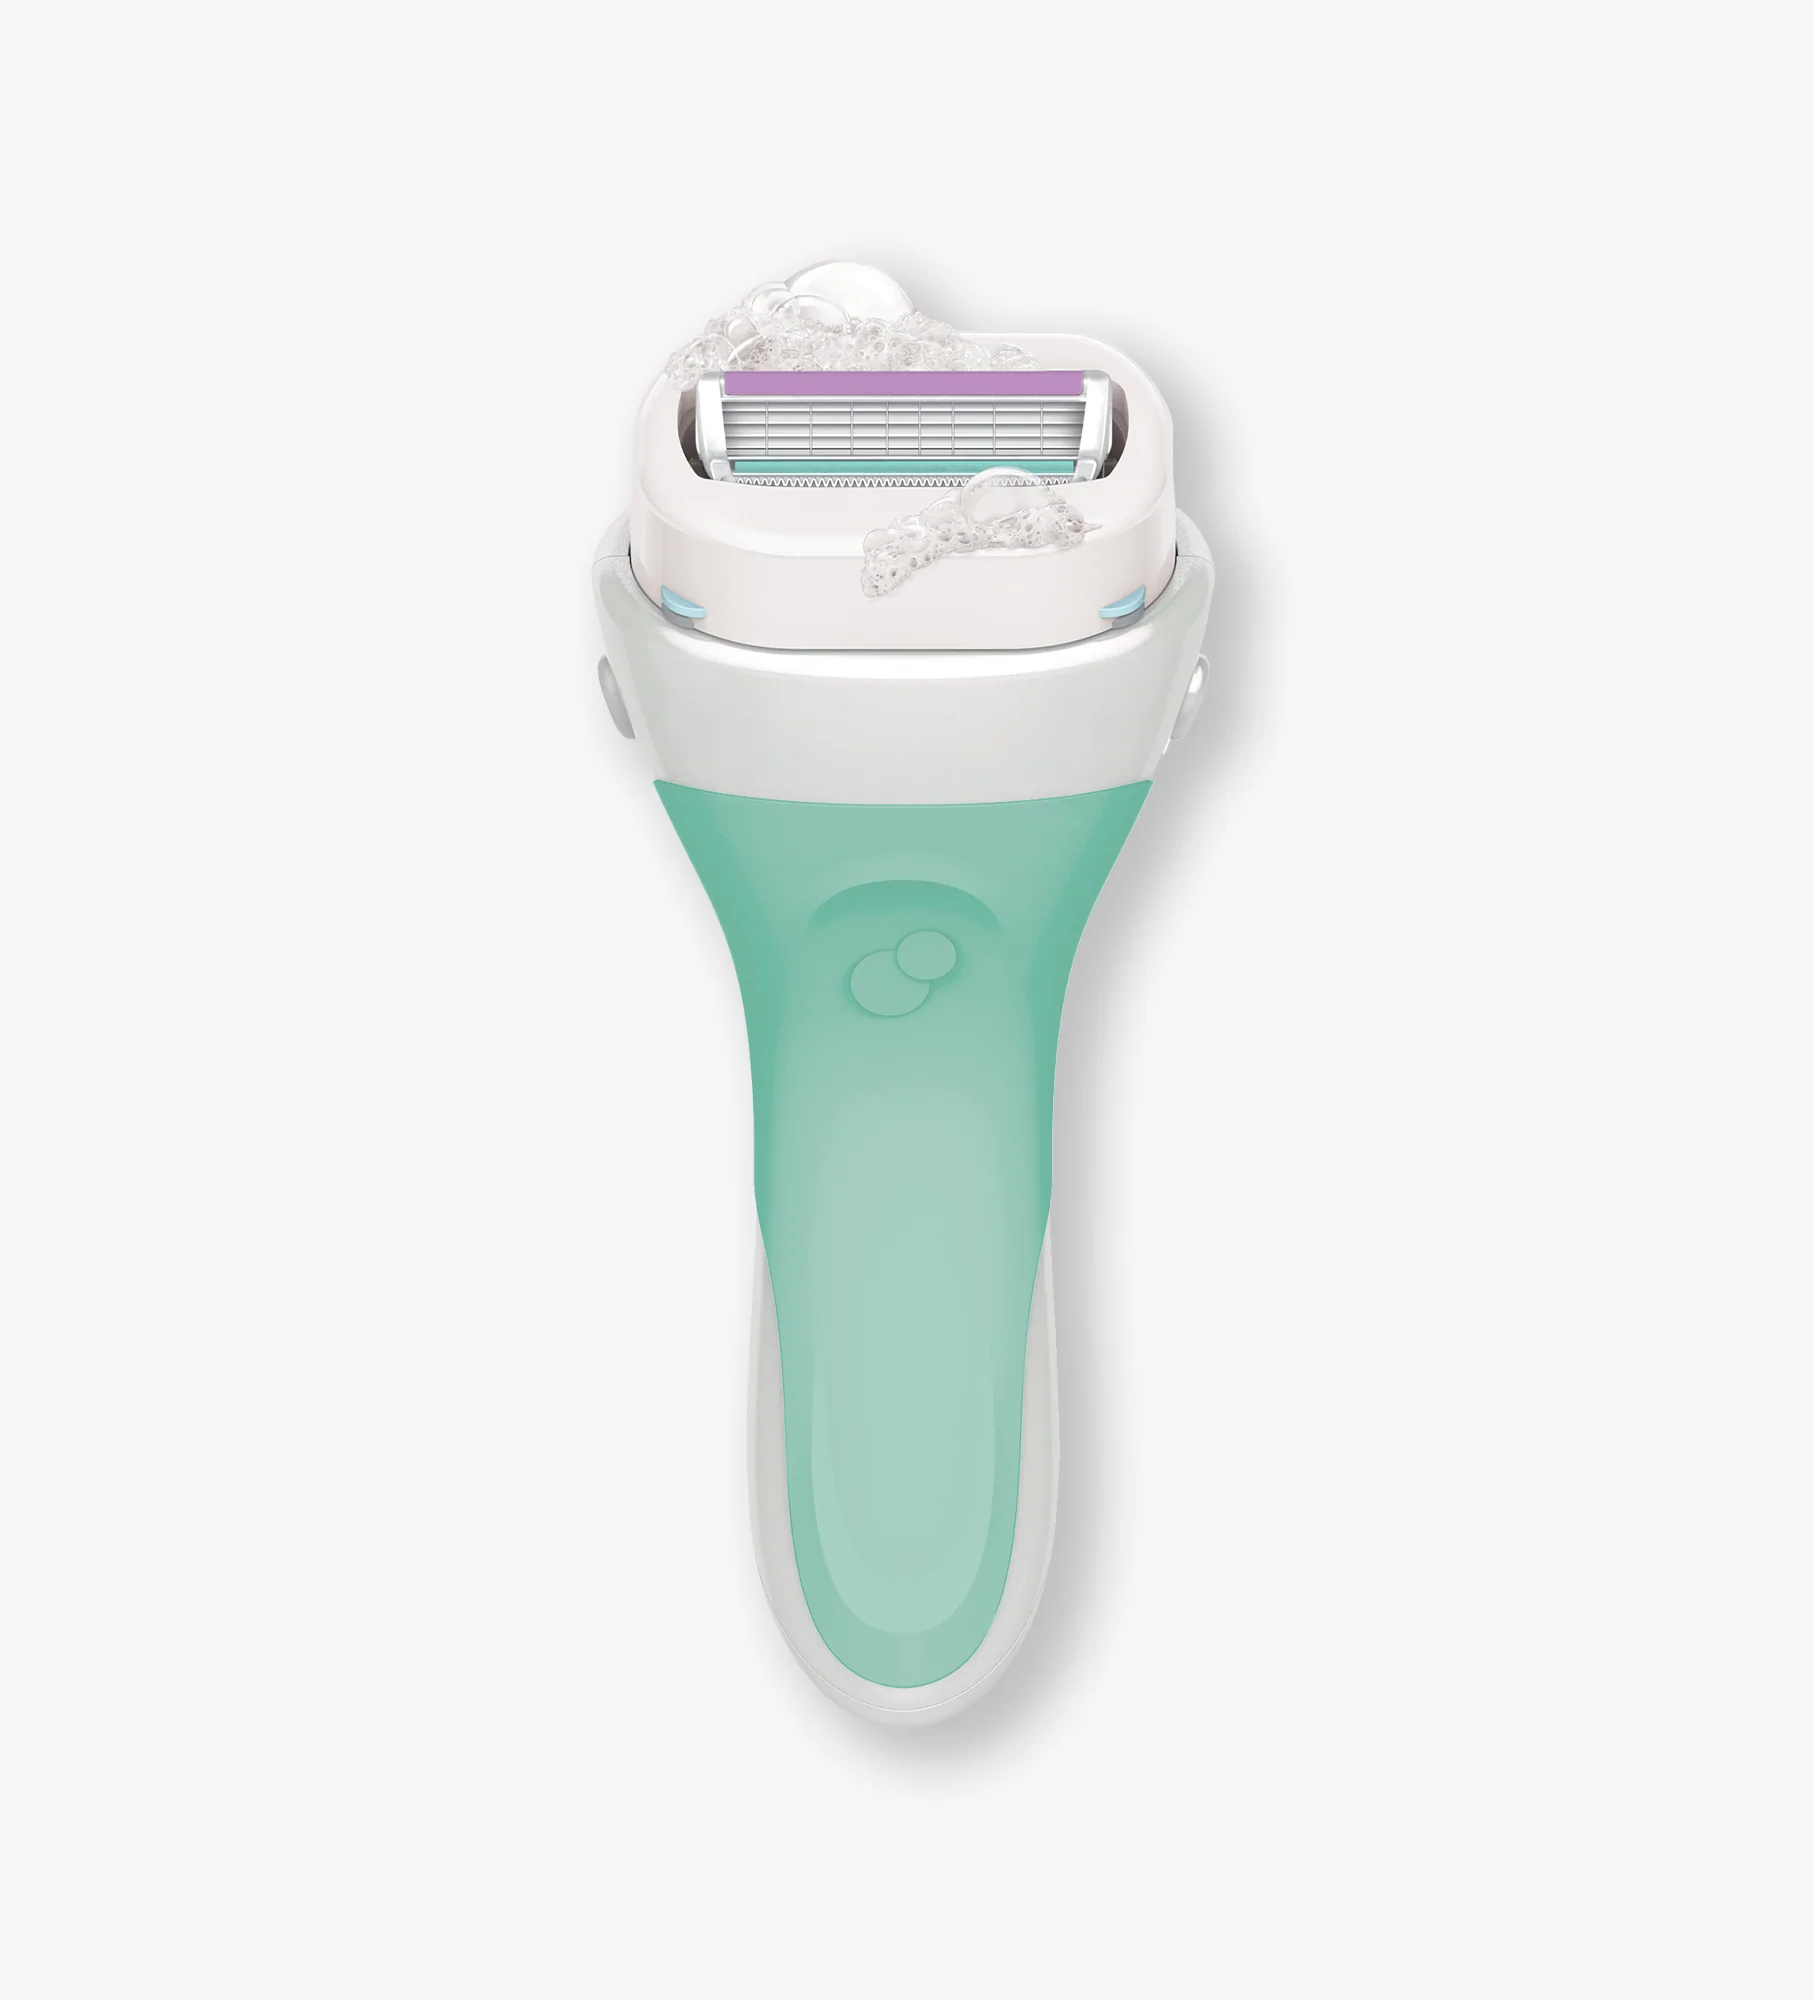 Schick-Intuition-Razor-Review